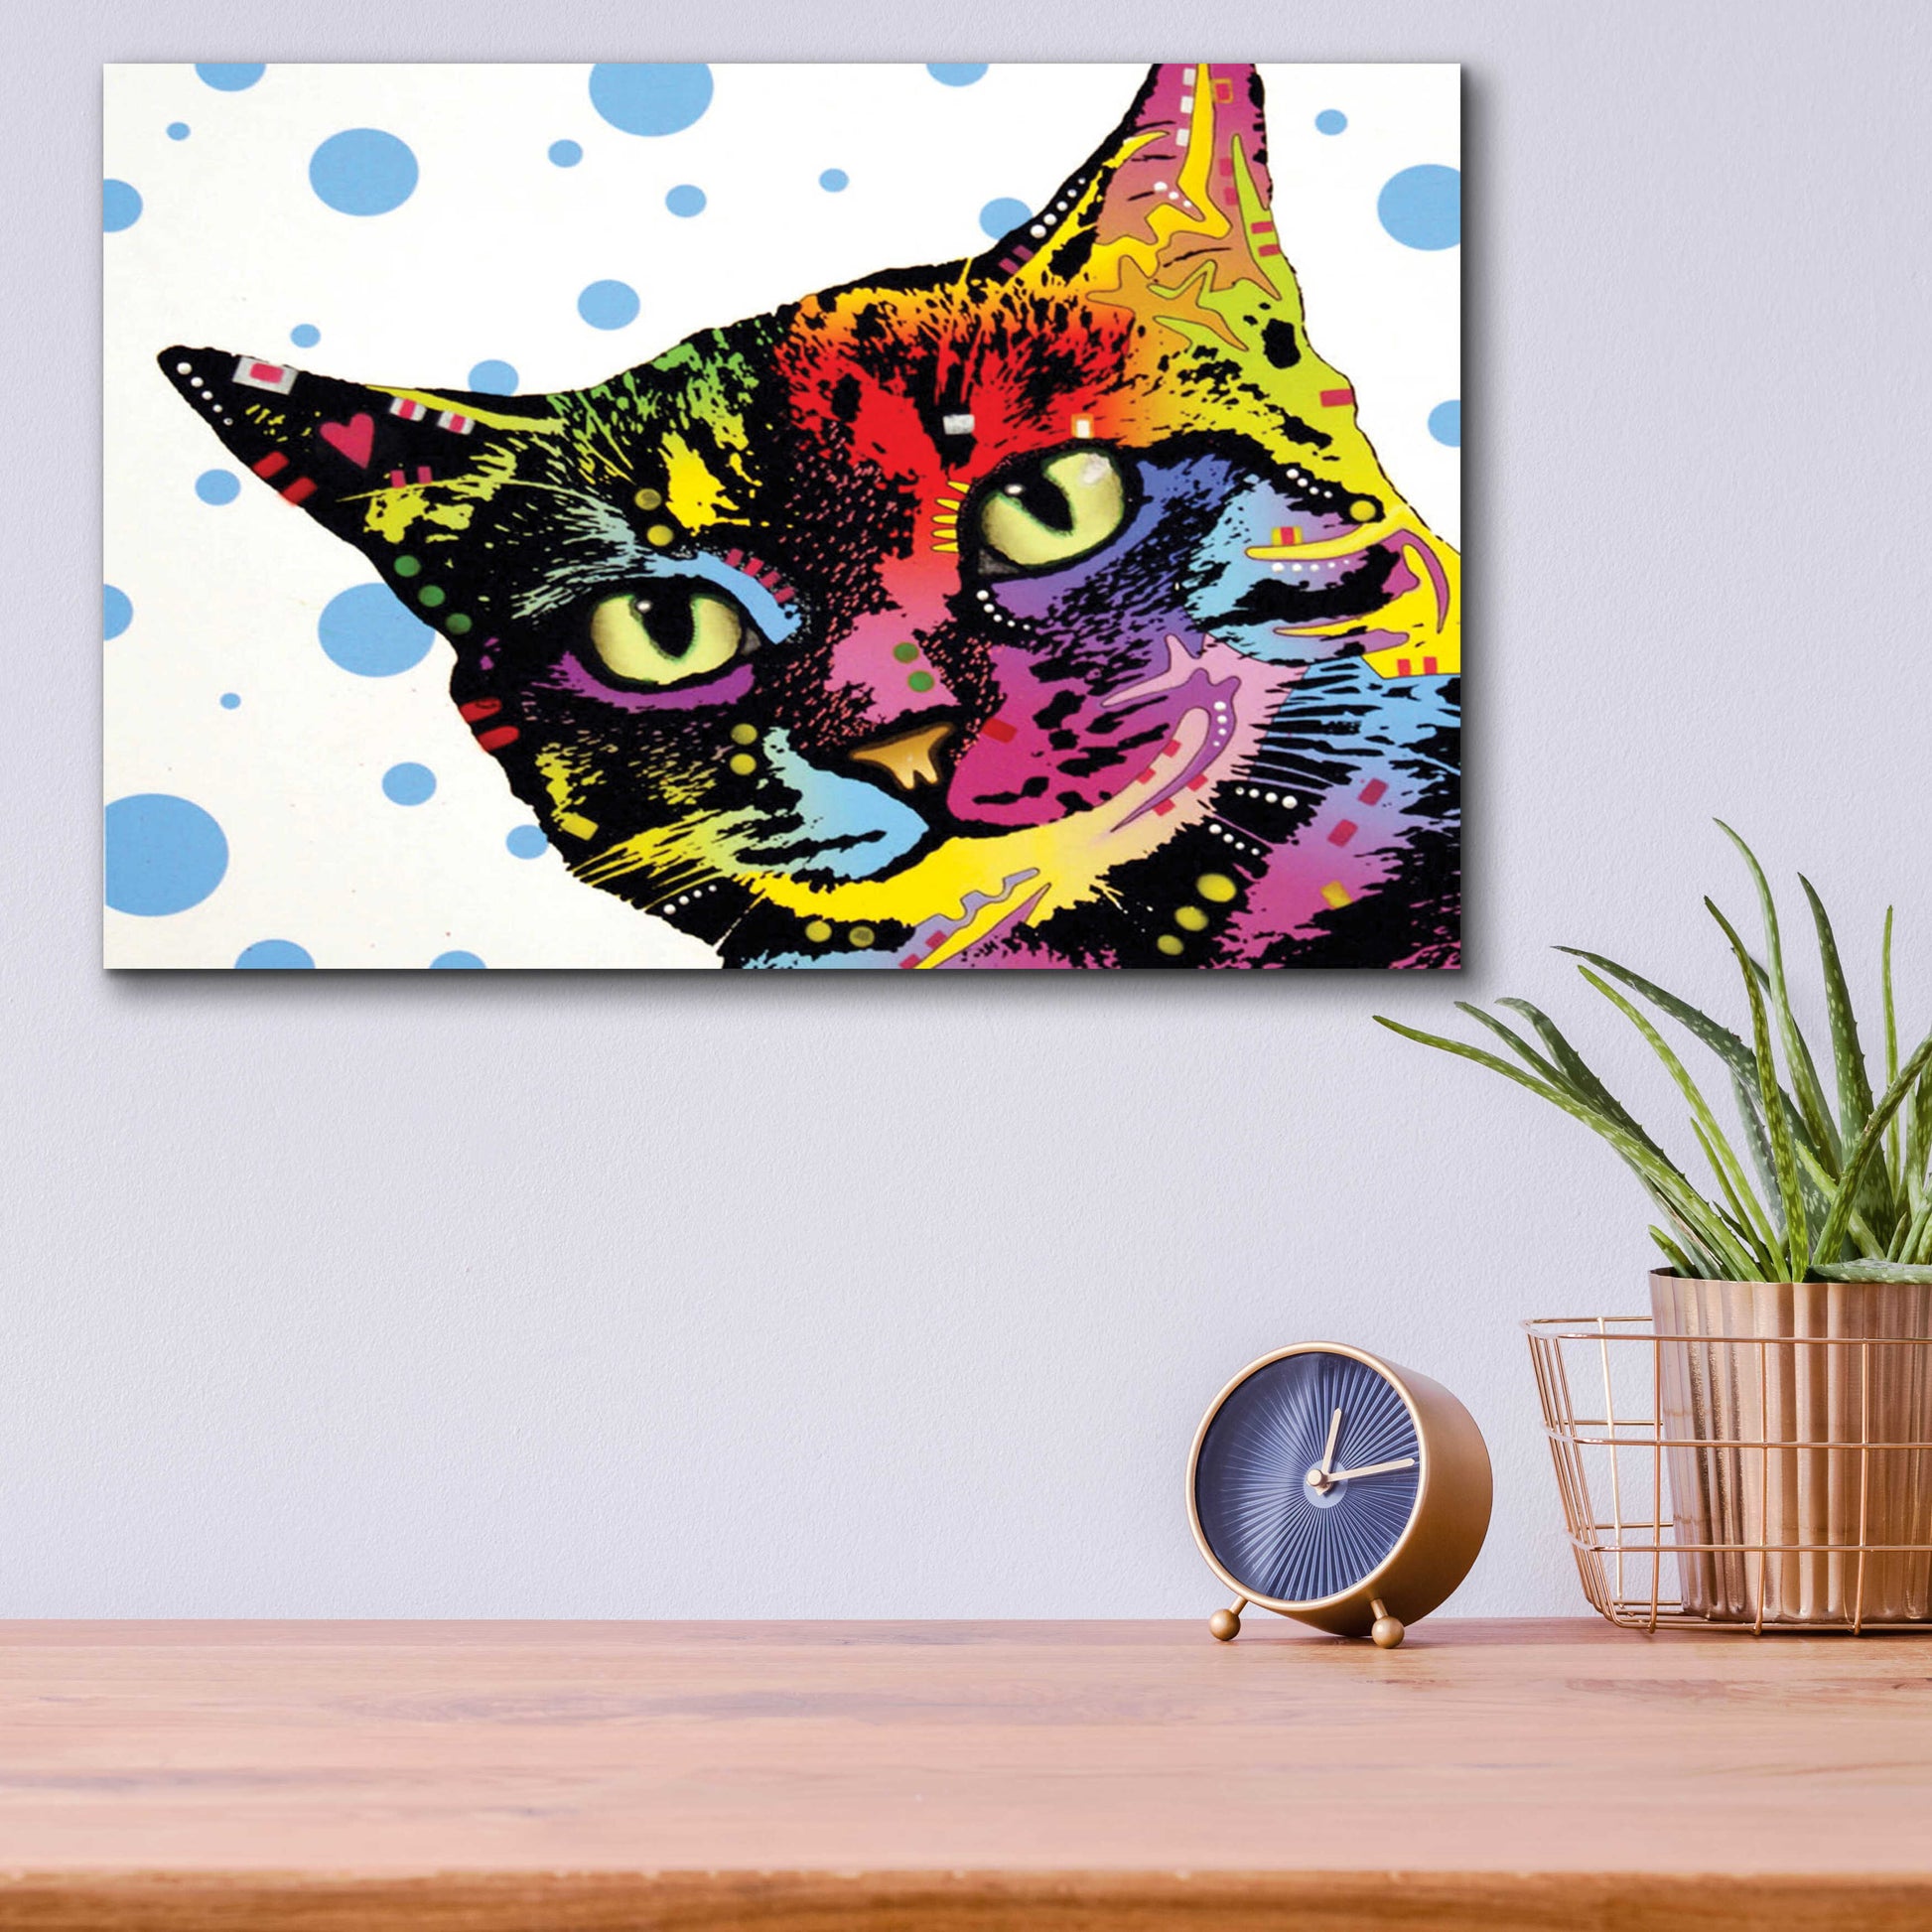 Epic Art 'The Pop Cat' by Dean Russo, Acrylic Glass Wall Art,16x12